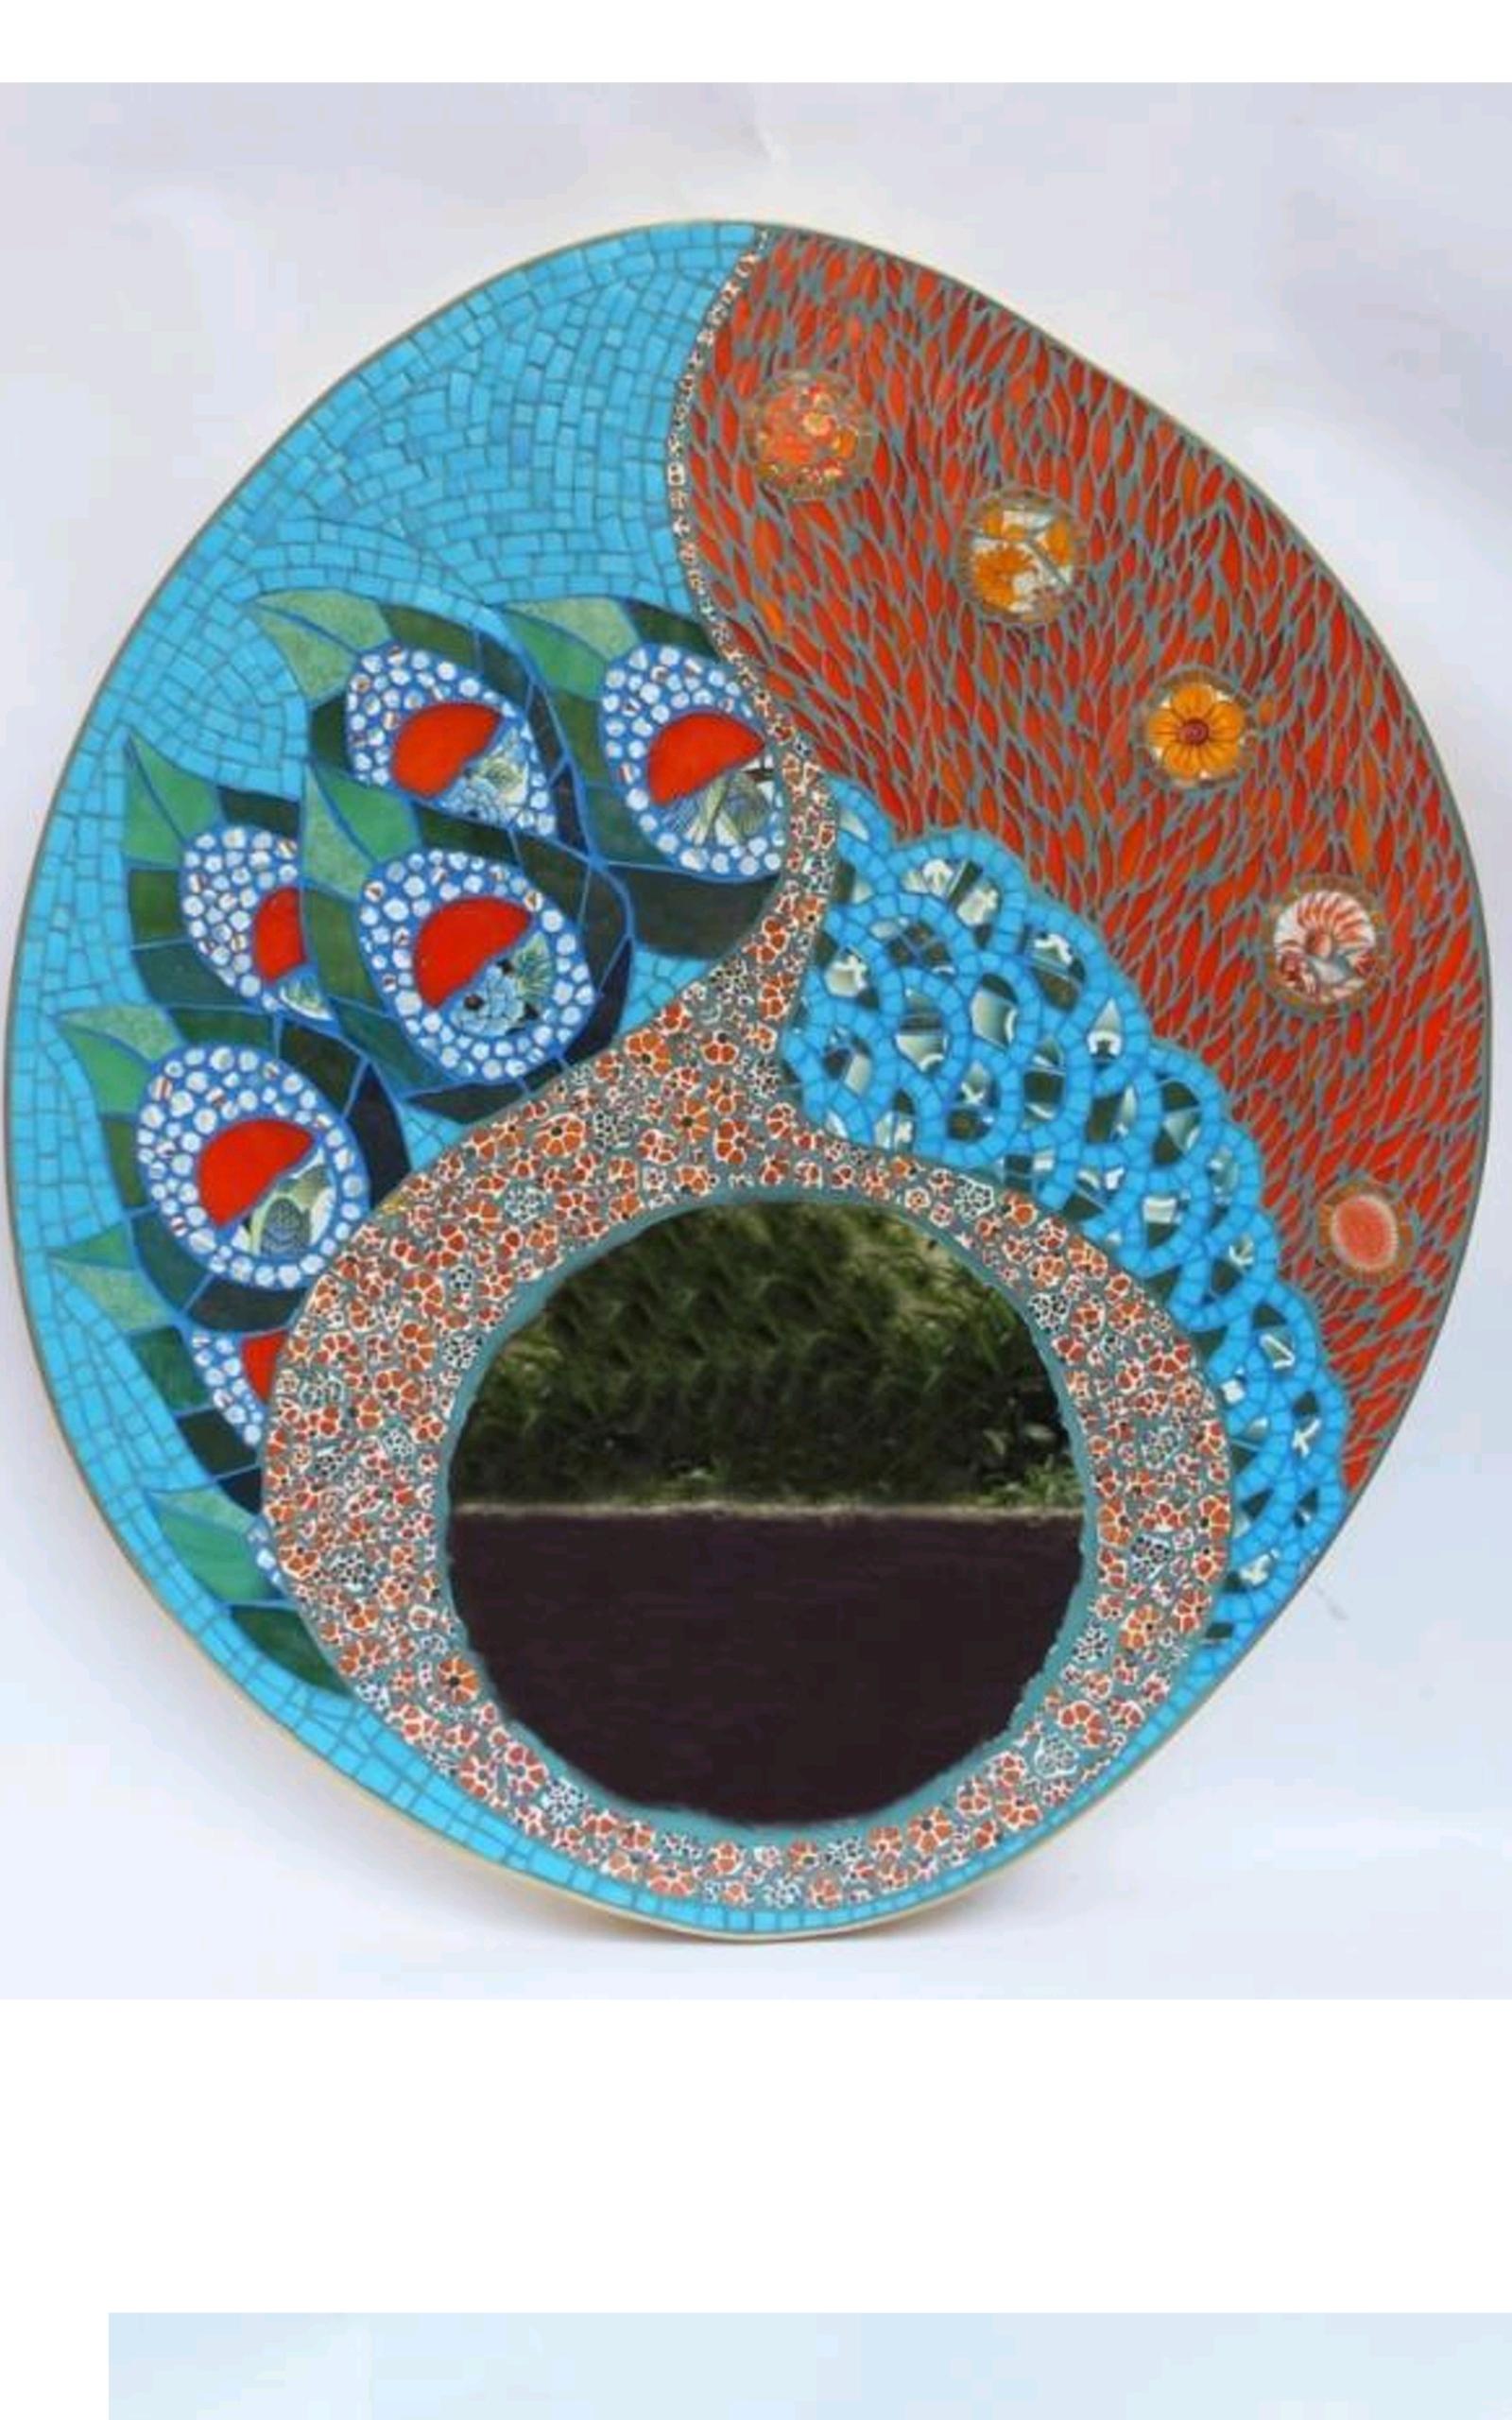 One of a kind stunning mosaic mirror, created by the artist using original vintage small customized covered in fragments of ceramic, porcelain dishes, old China, mirrors, glass, etc. All these different materials are gather together and hand cut one